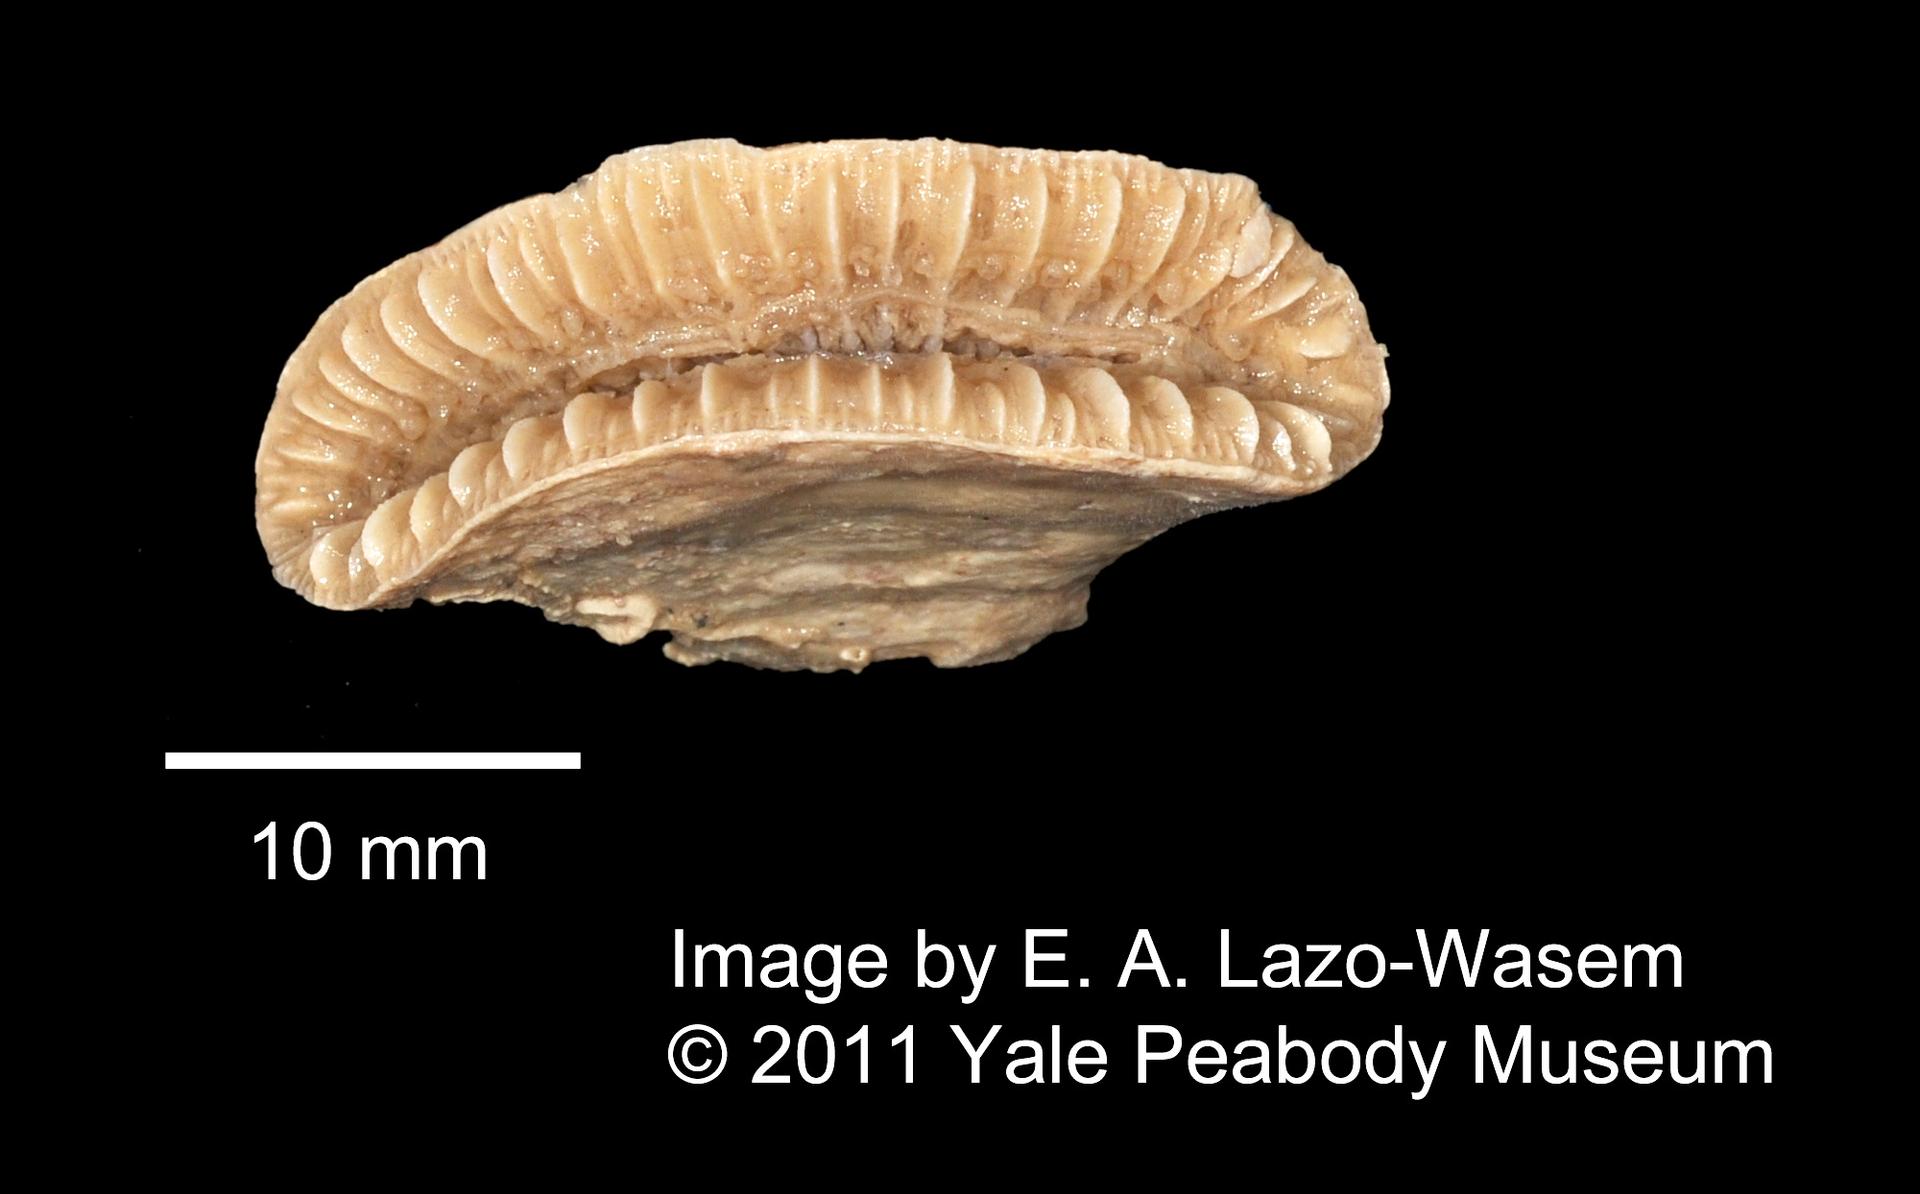 To Yale Peabody Museum of Natural History (YPM IZ 000716.CN)